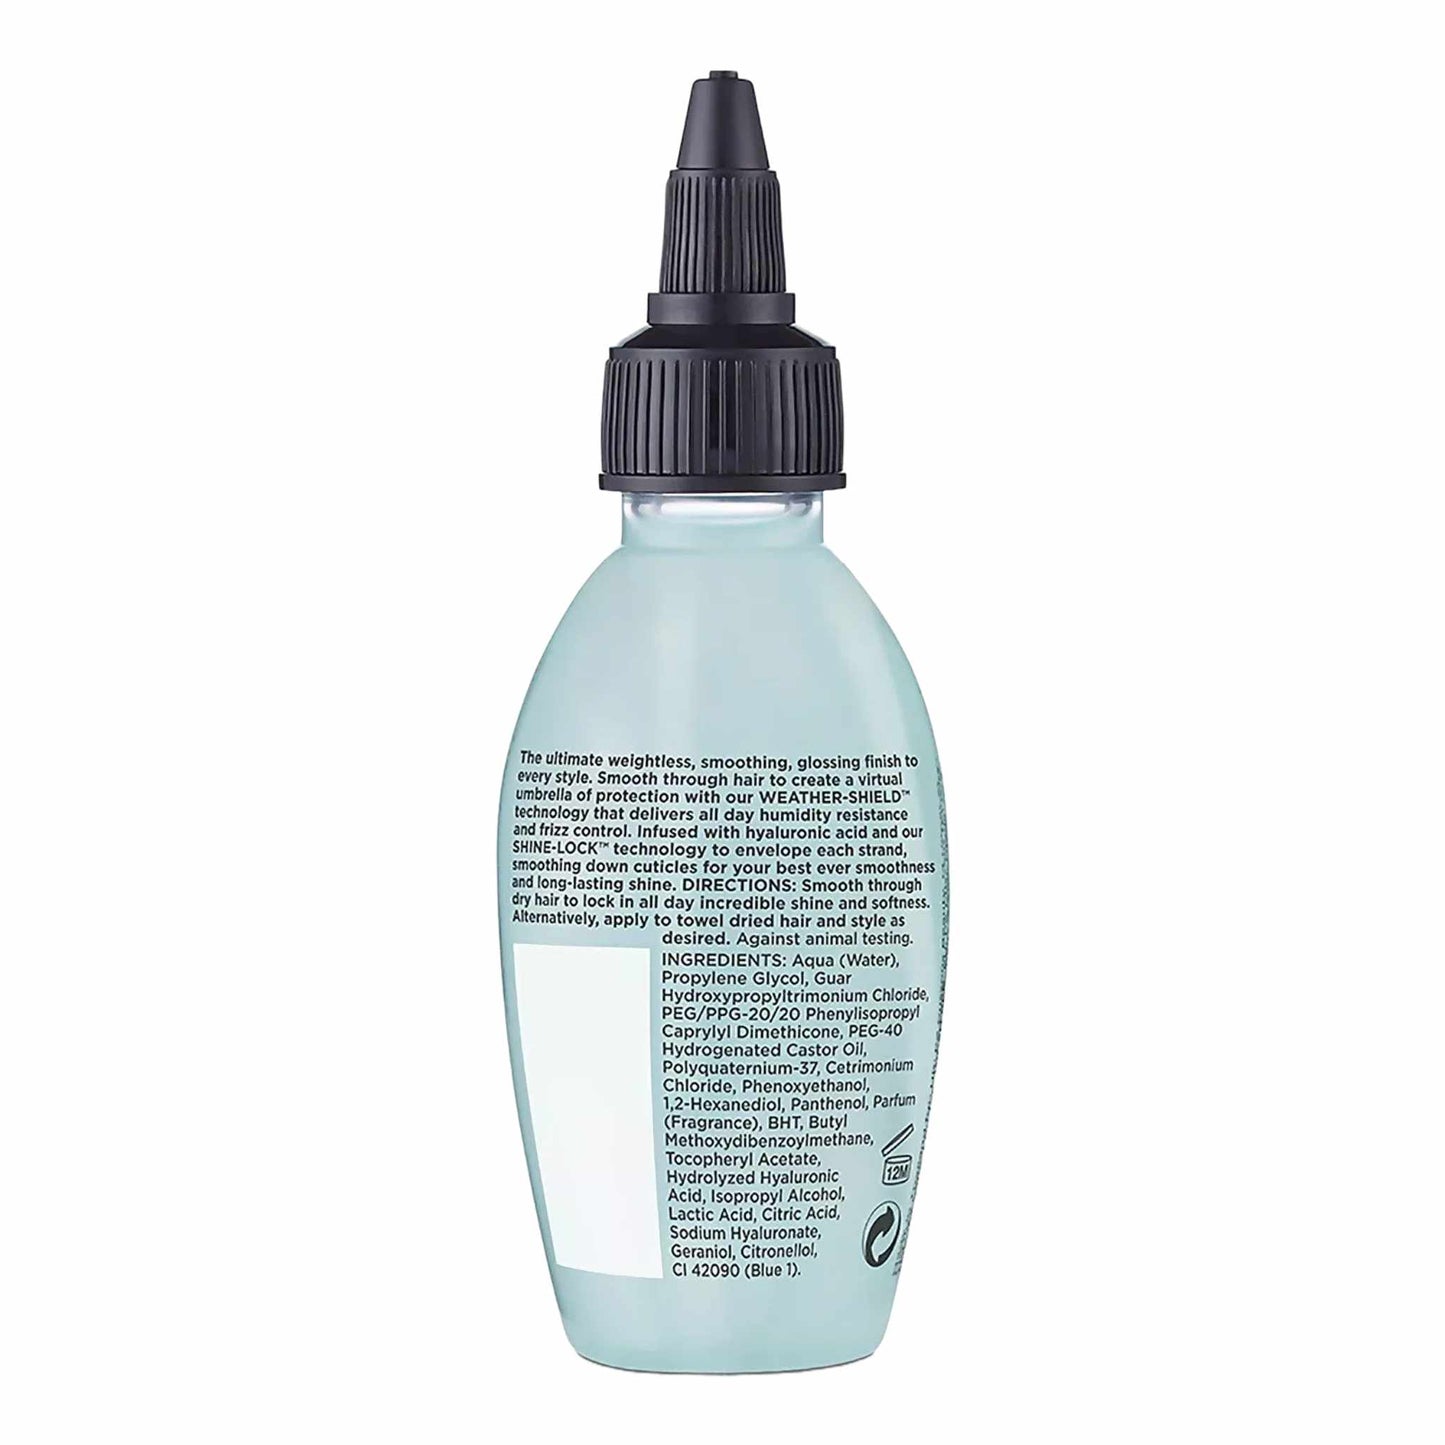 Fudge Aqua Shine Serum 50 ml 9 out of 10 agree this product doesn't weigh down their hair